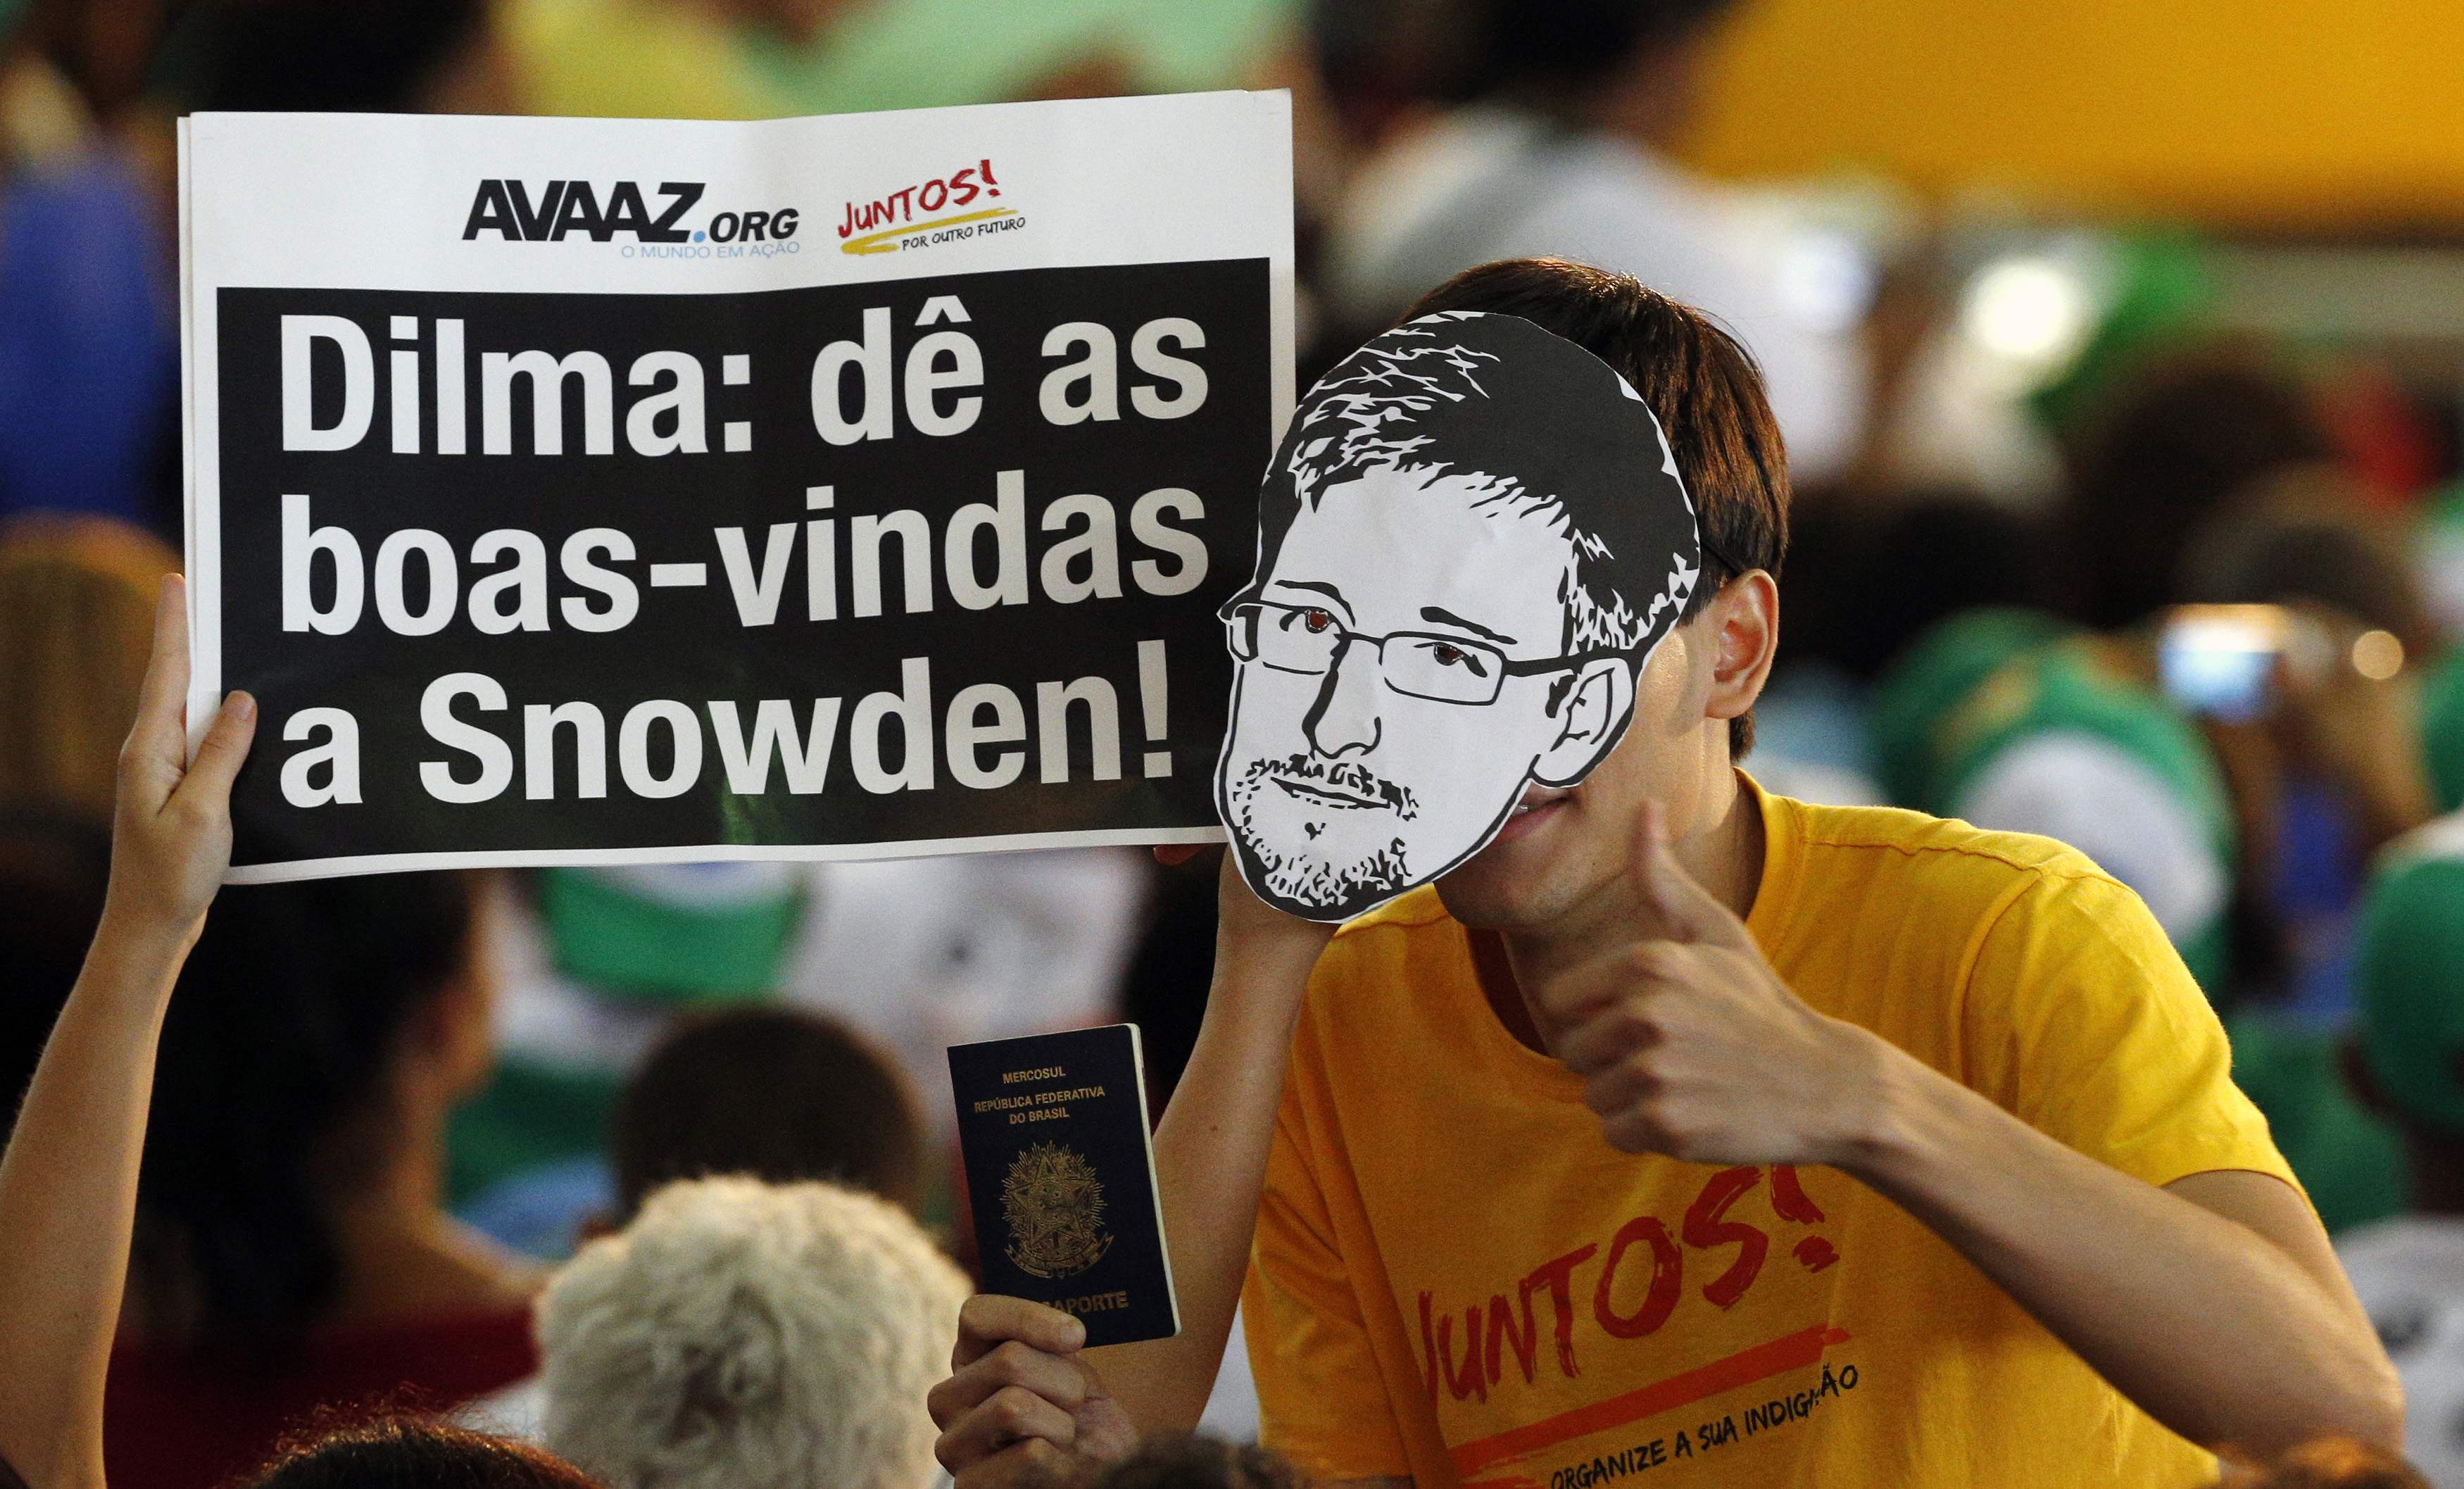 Finally, Snowden gets his answer from Obama